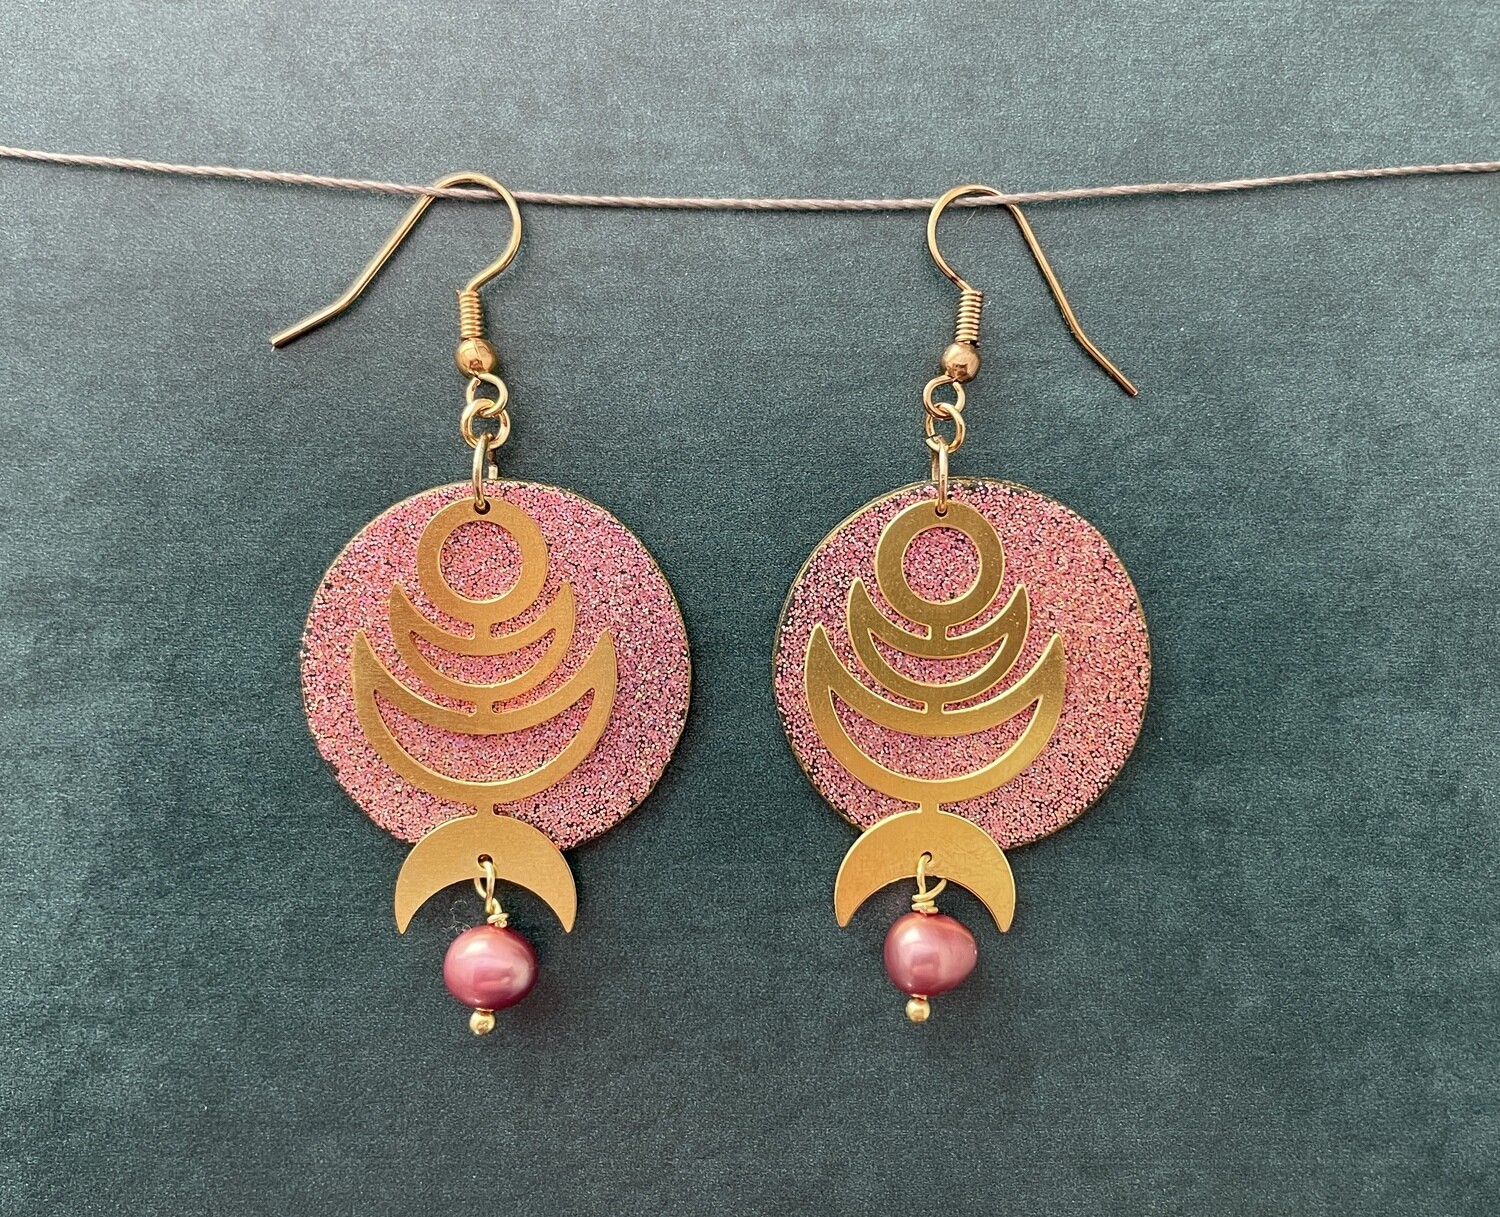 Moon Goddess earring with pearl- pink and holographic glitter